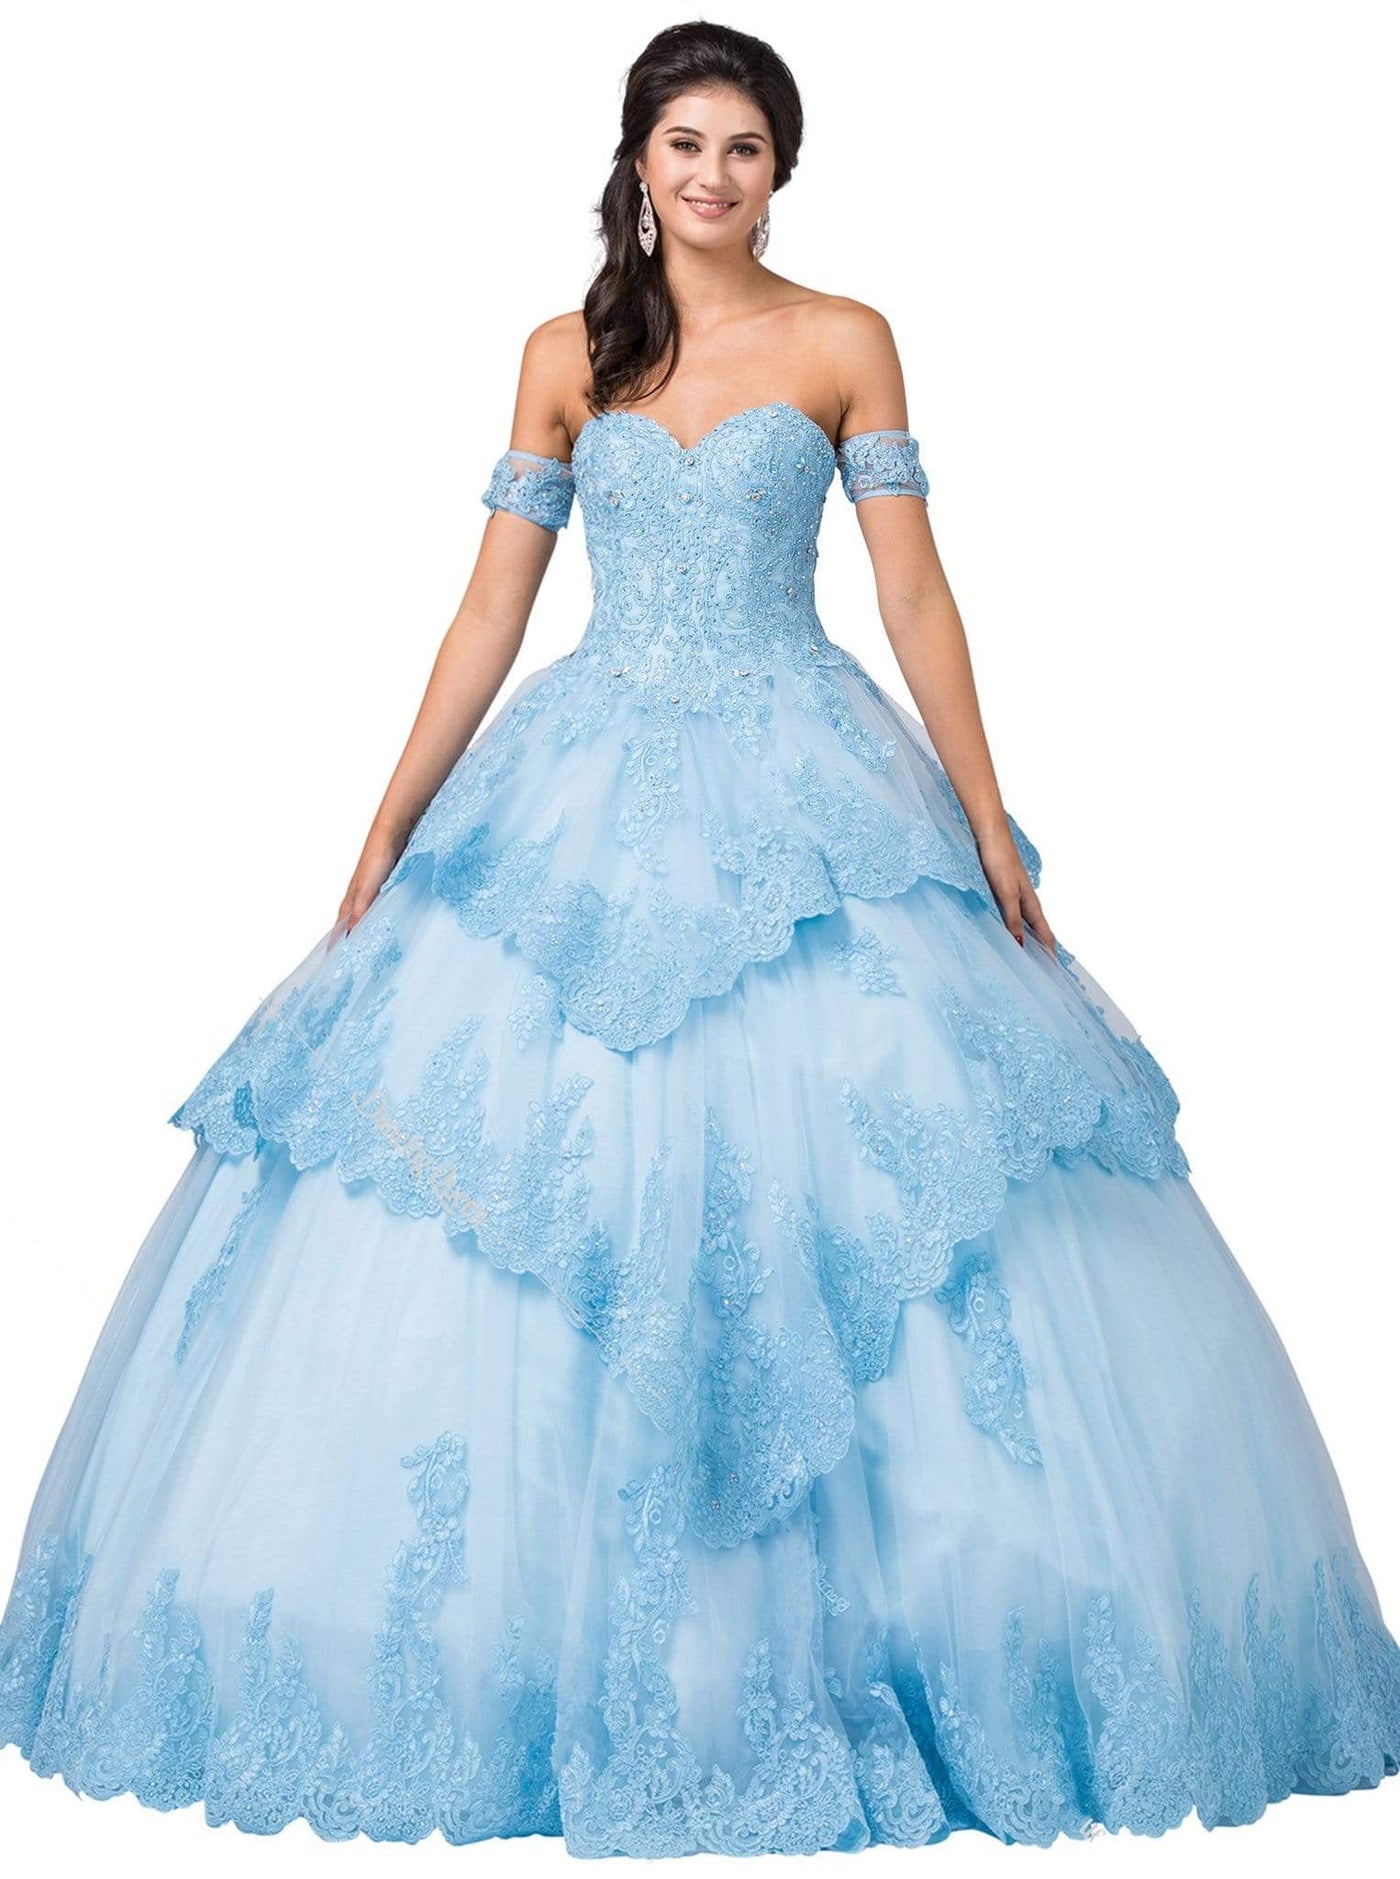 Dancing Queen - 1404 Strapless Sweetheart Tiered Scallop Hem Ballgown Special Occasion Dress XS / Sky Blue